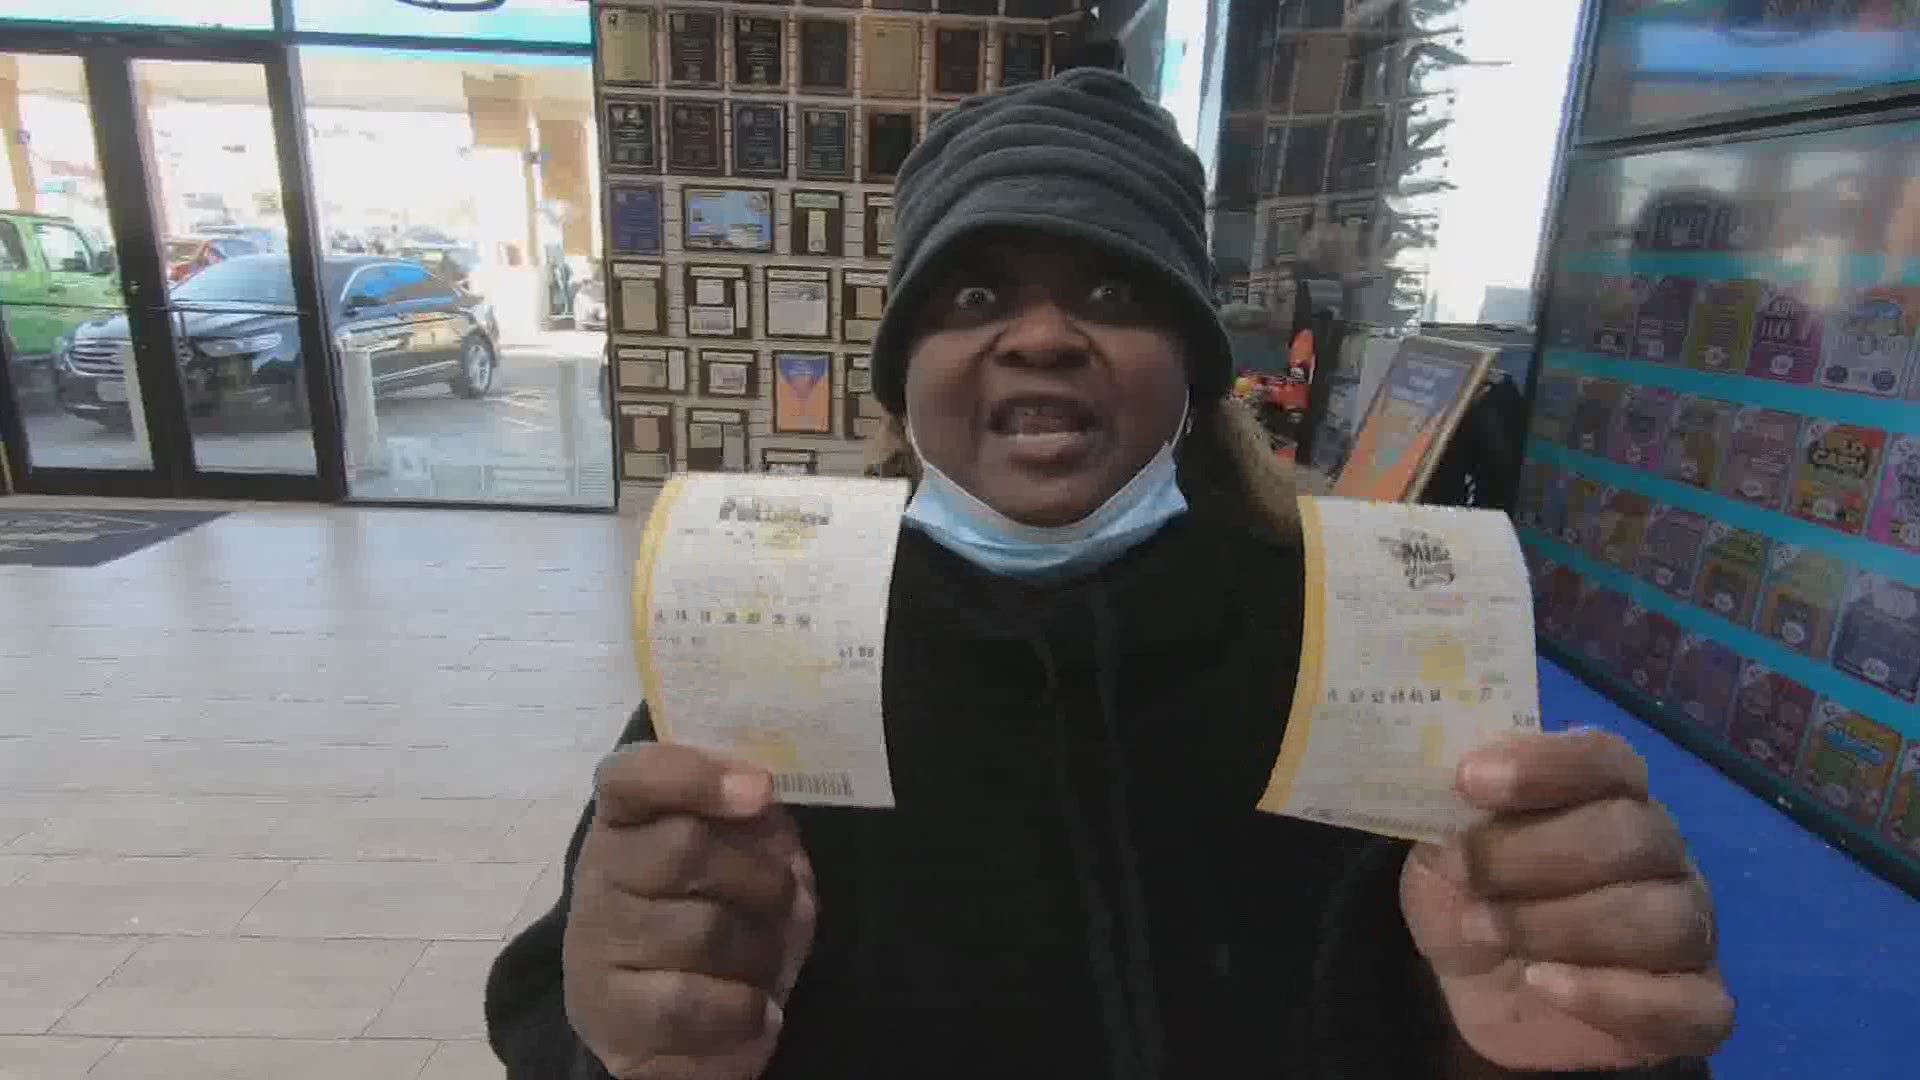 Houston-area residents bought lottery tickets Saturday night in hopes of hitting the Powerball jackpot, which is up to $640 million.